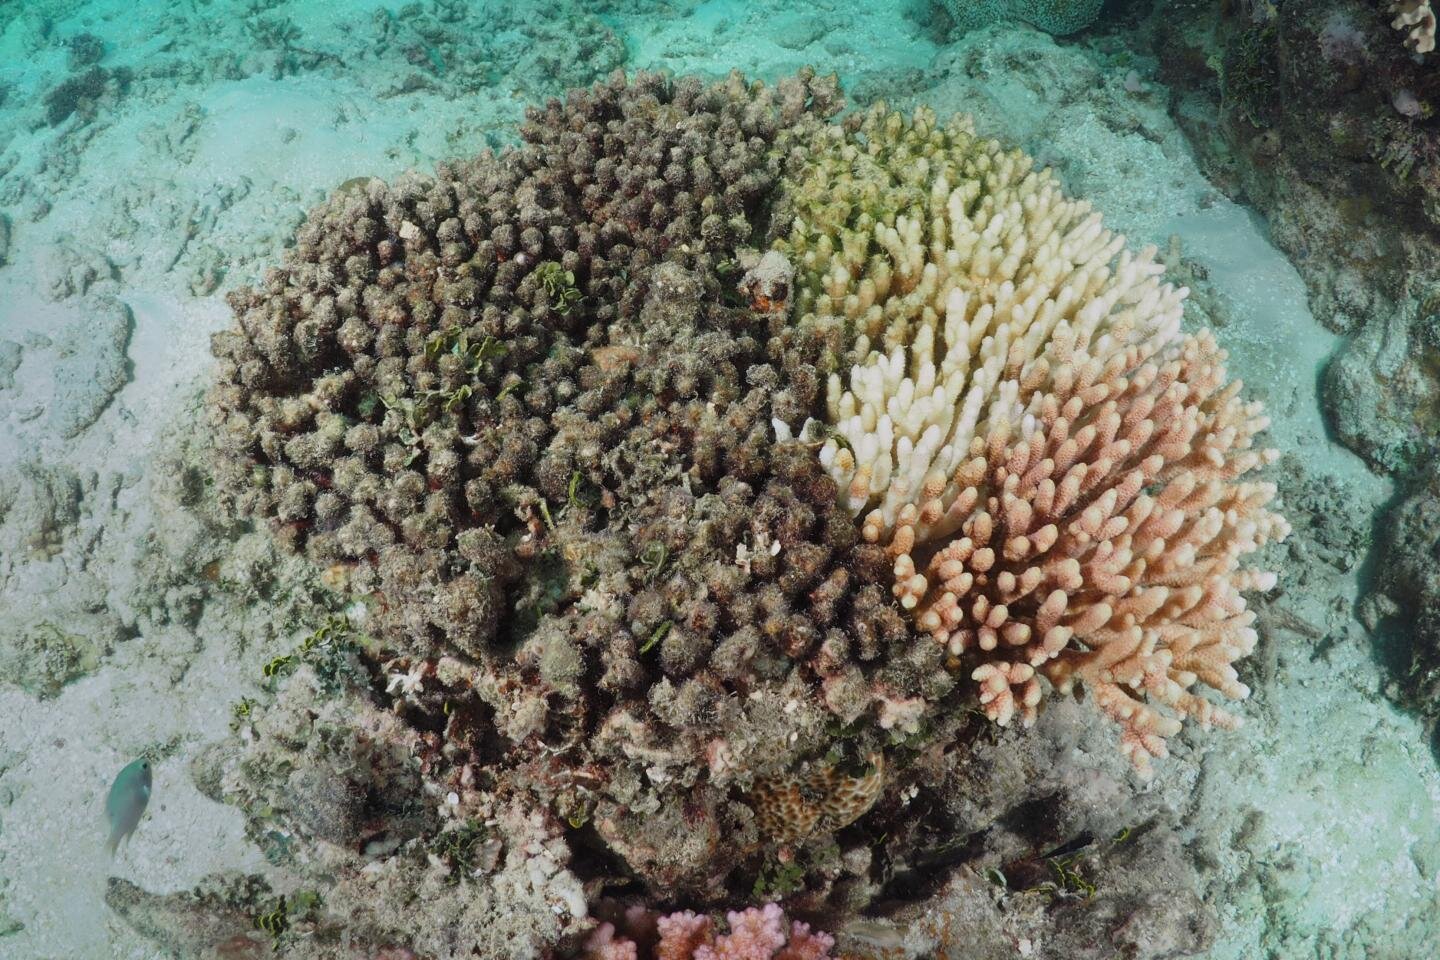 Genetics could help protect coral reefs from global warming - Phys.org